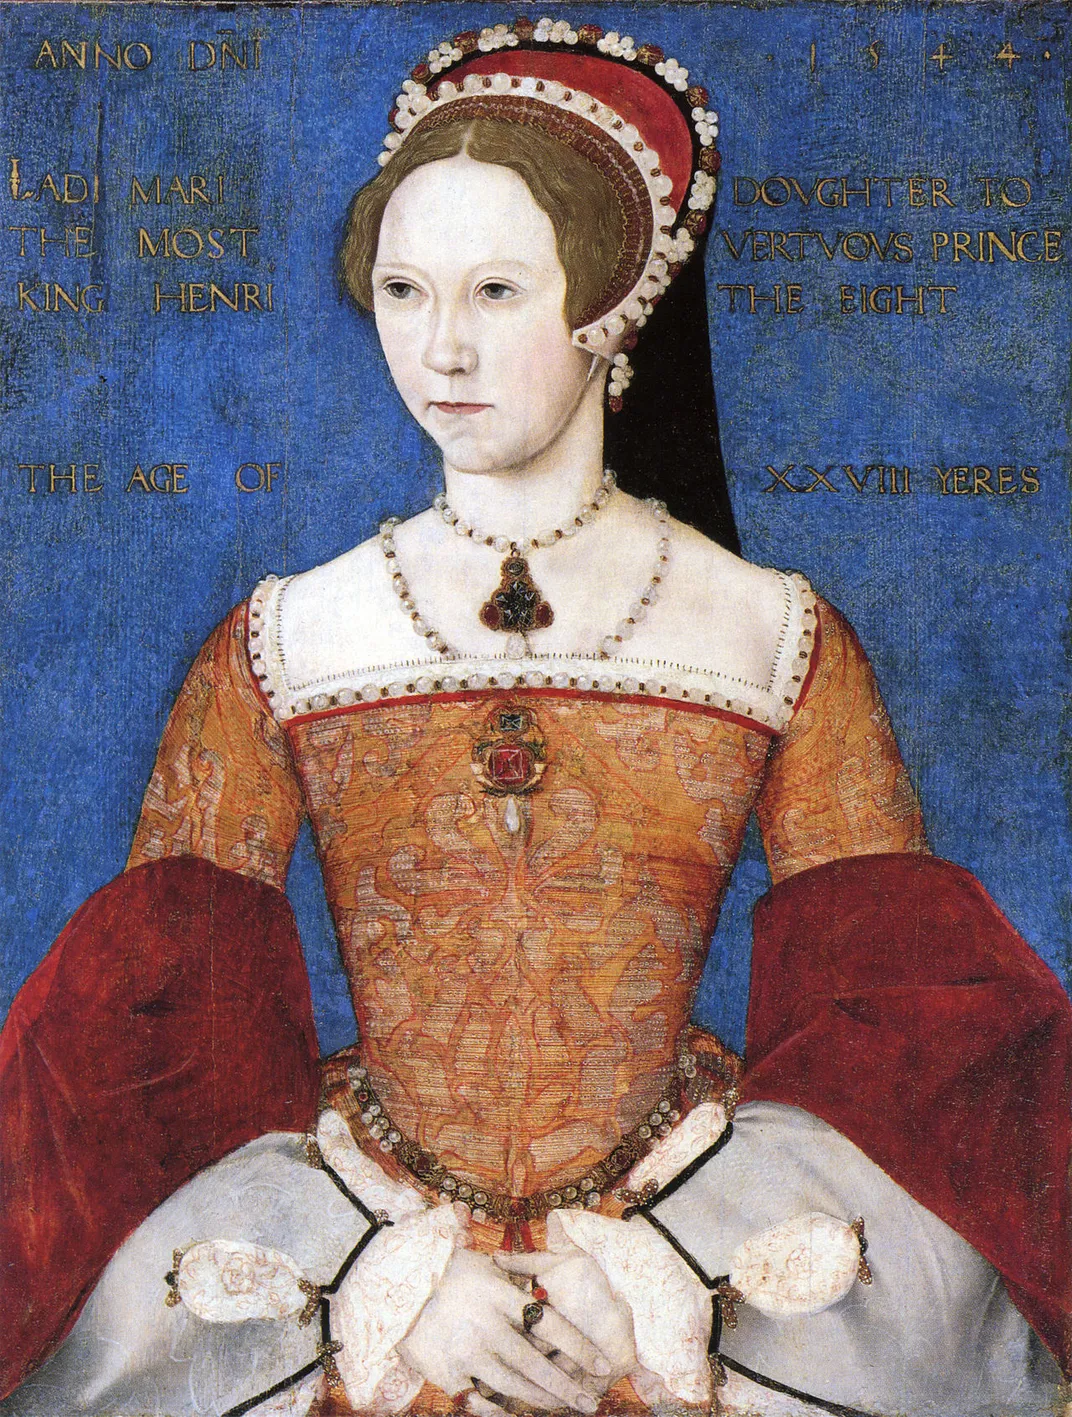 A 1544 portrait of the future Mary I, Henry and Catherine's daughter